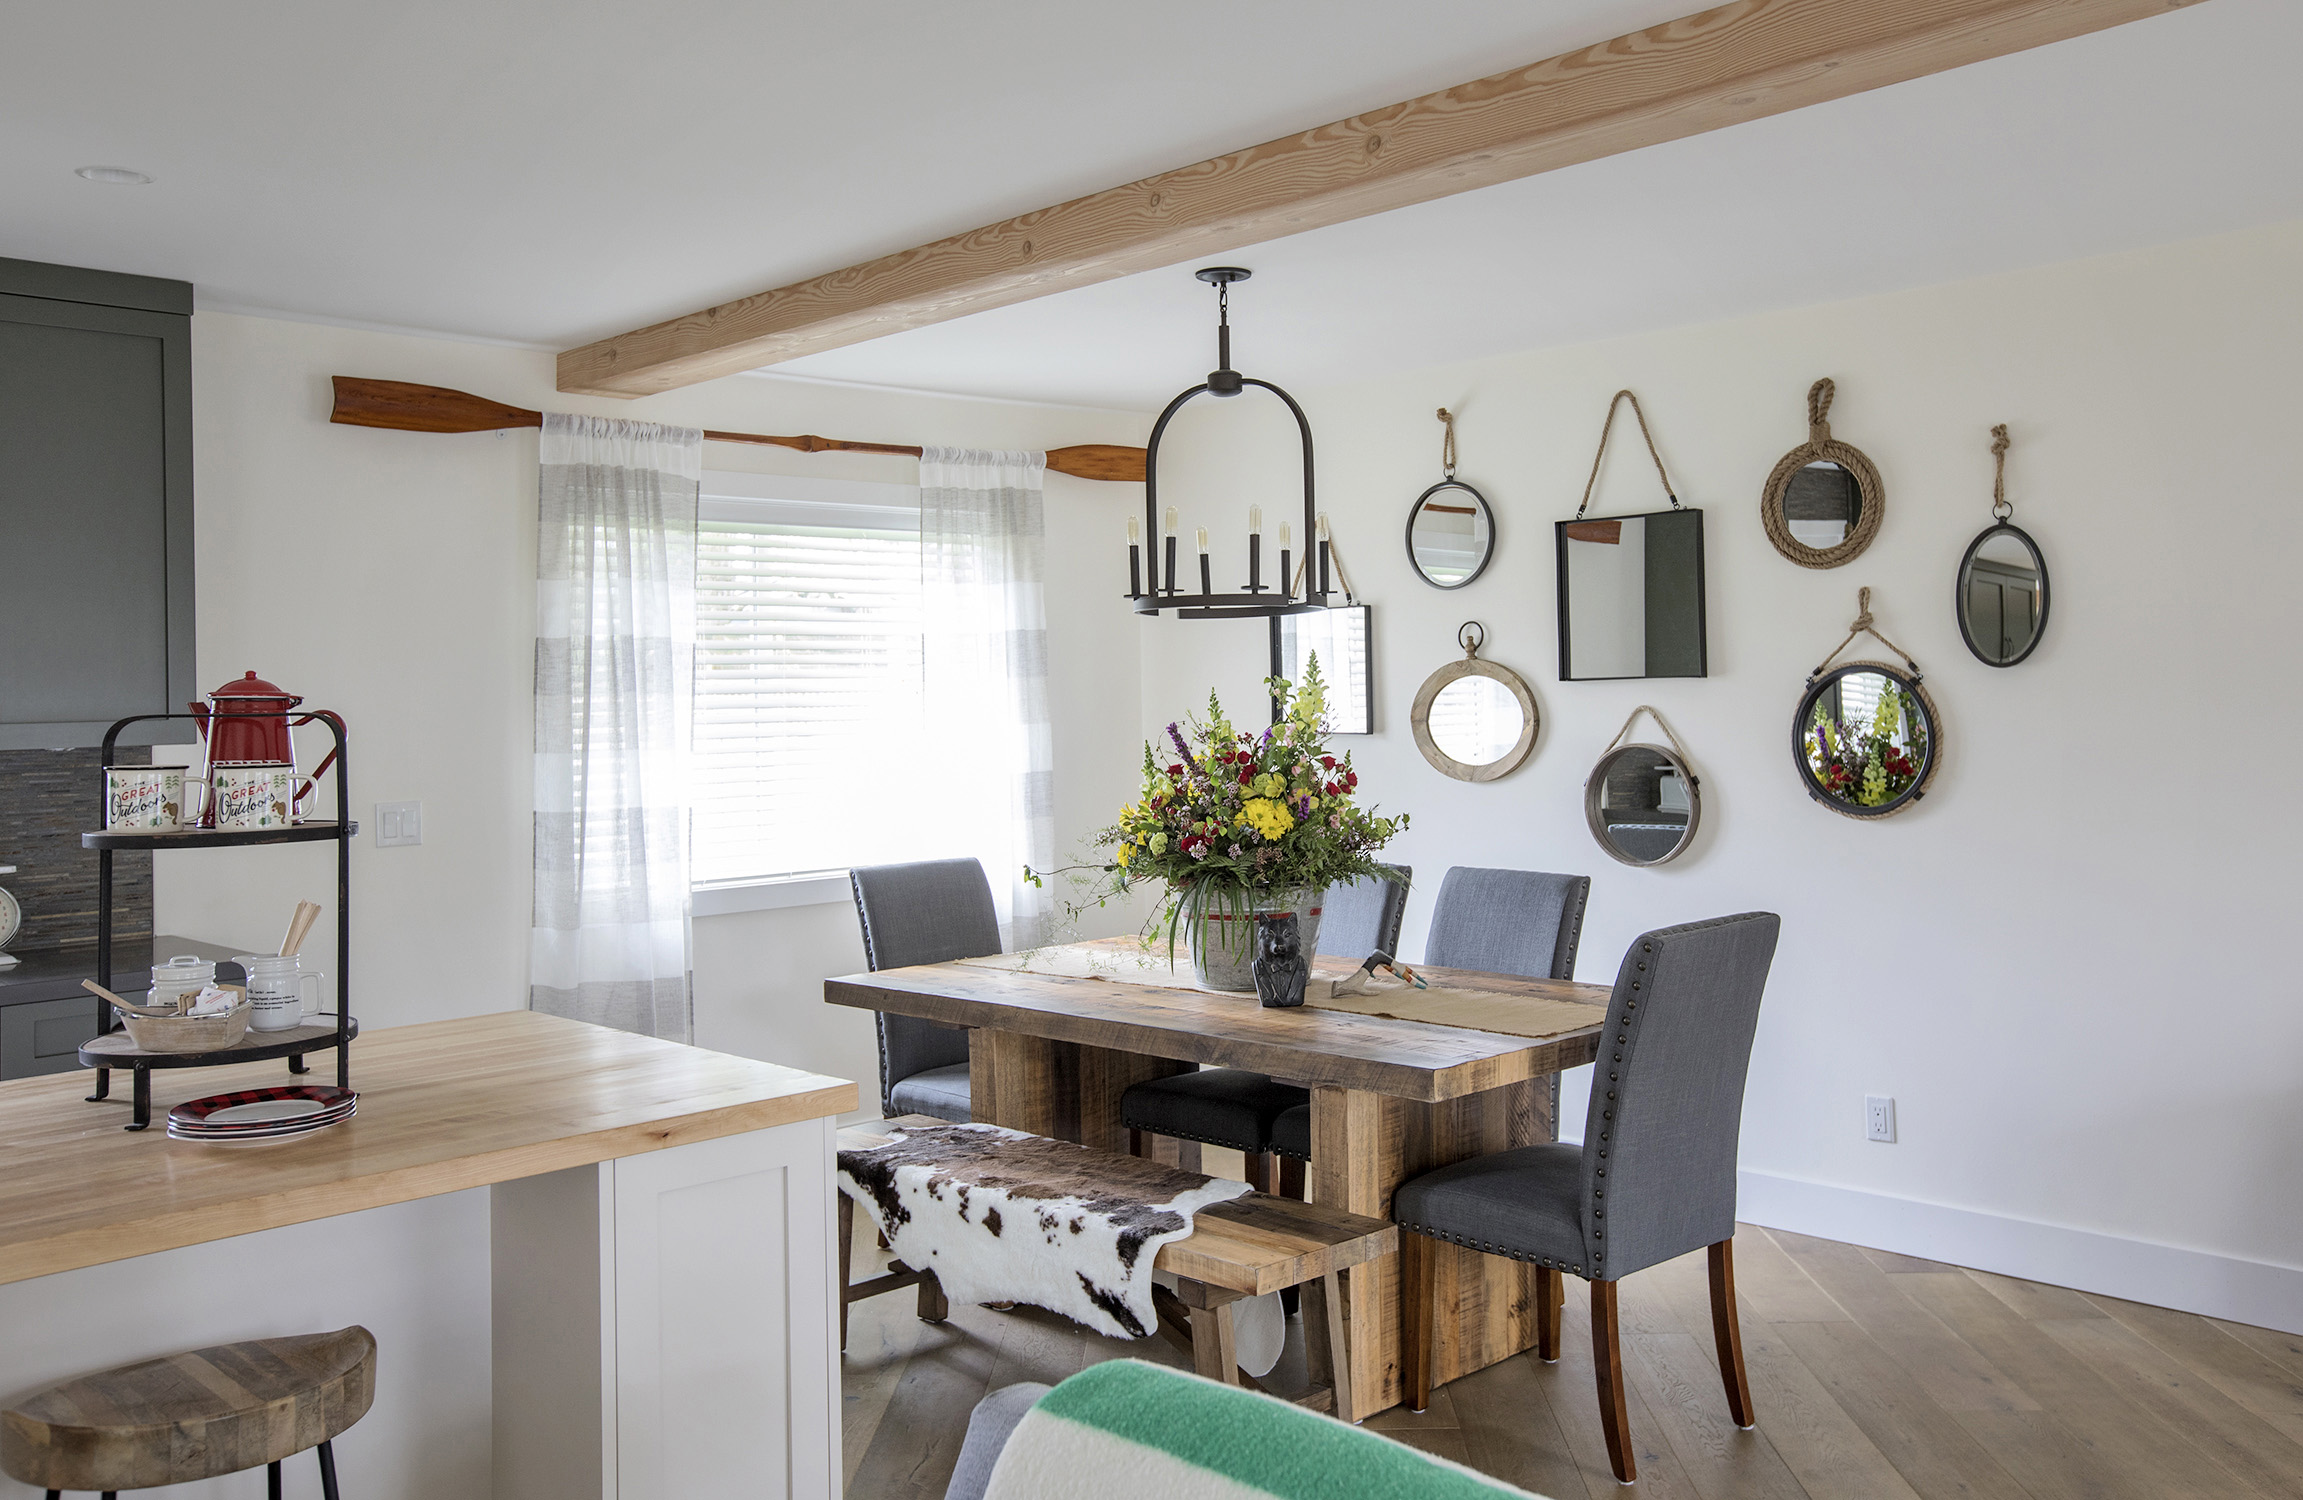 Rustic and relaxed, this laidback dining area manages to perfectly meld cottage and contemporary design concepts.